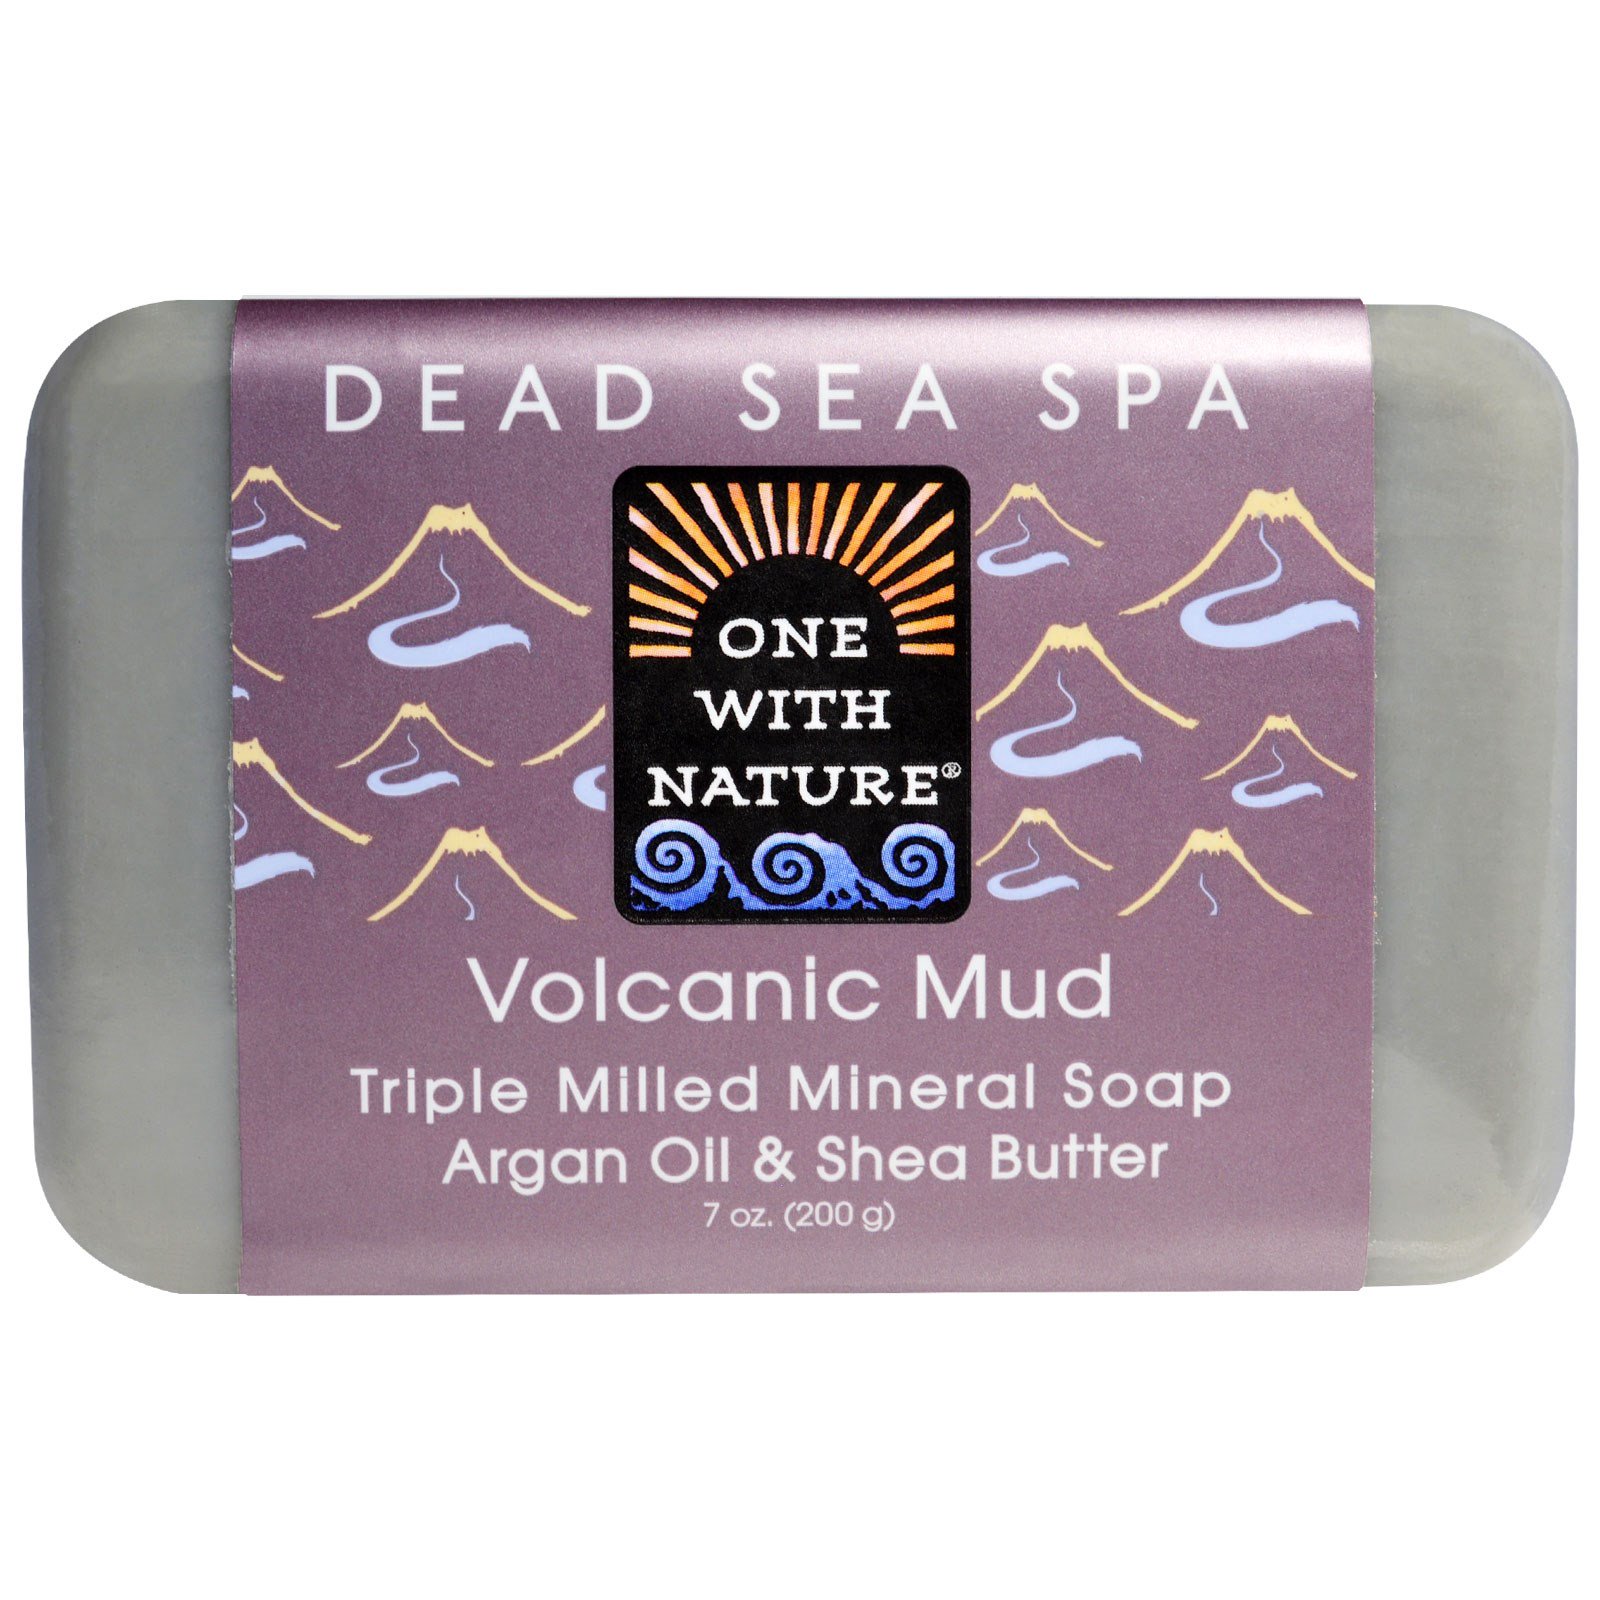 Triple Milled Mineral Soap, Volcanic Mud, 7 oz (200 g)